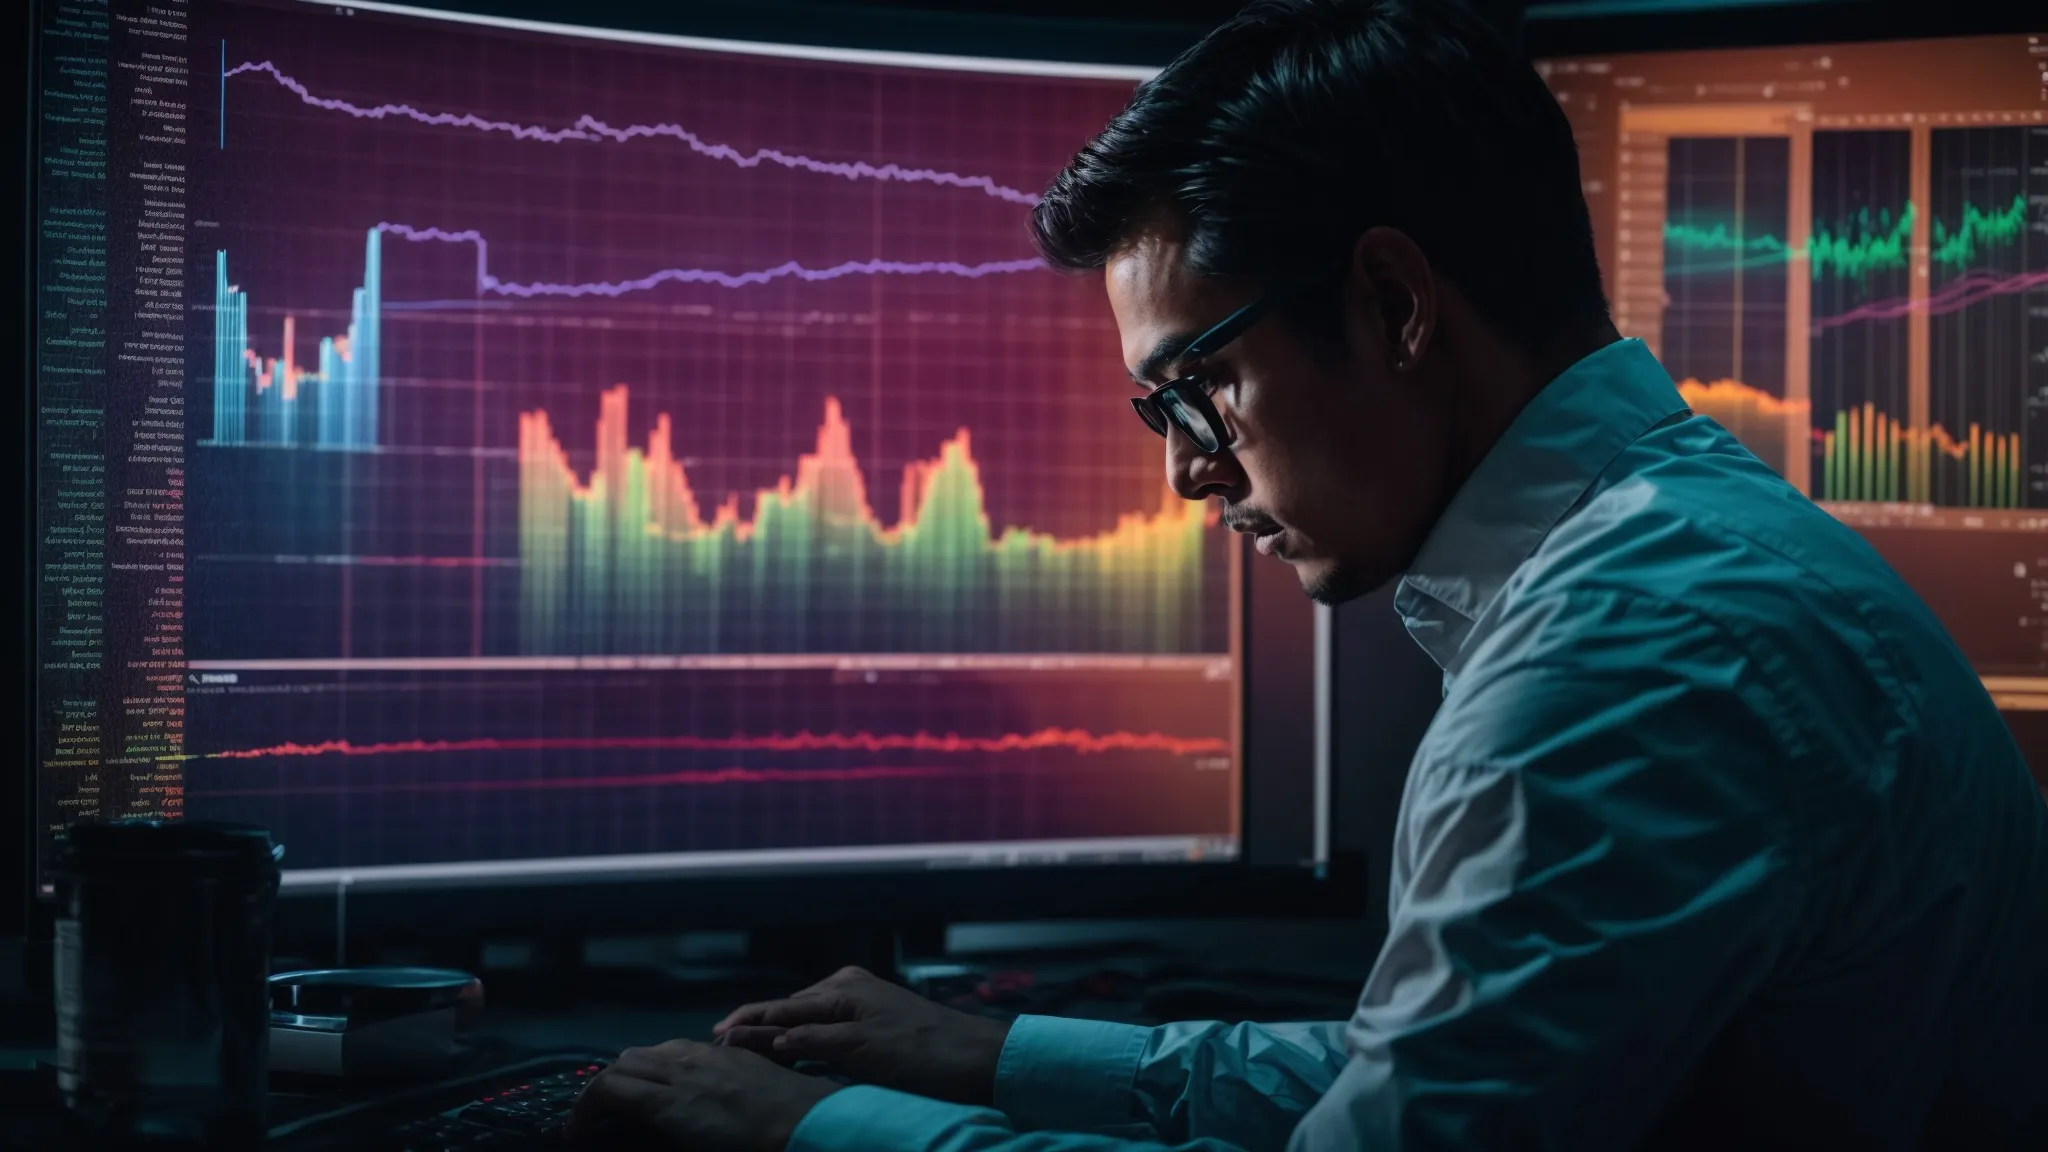 a person intently analyzes a large computer screen displaying colorful graphs and data metrics related to search engine optimization.